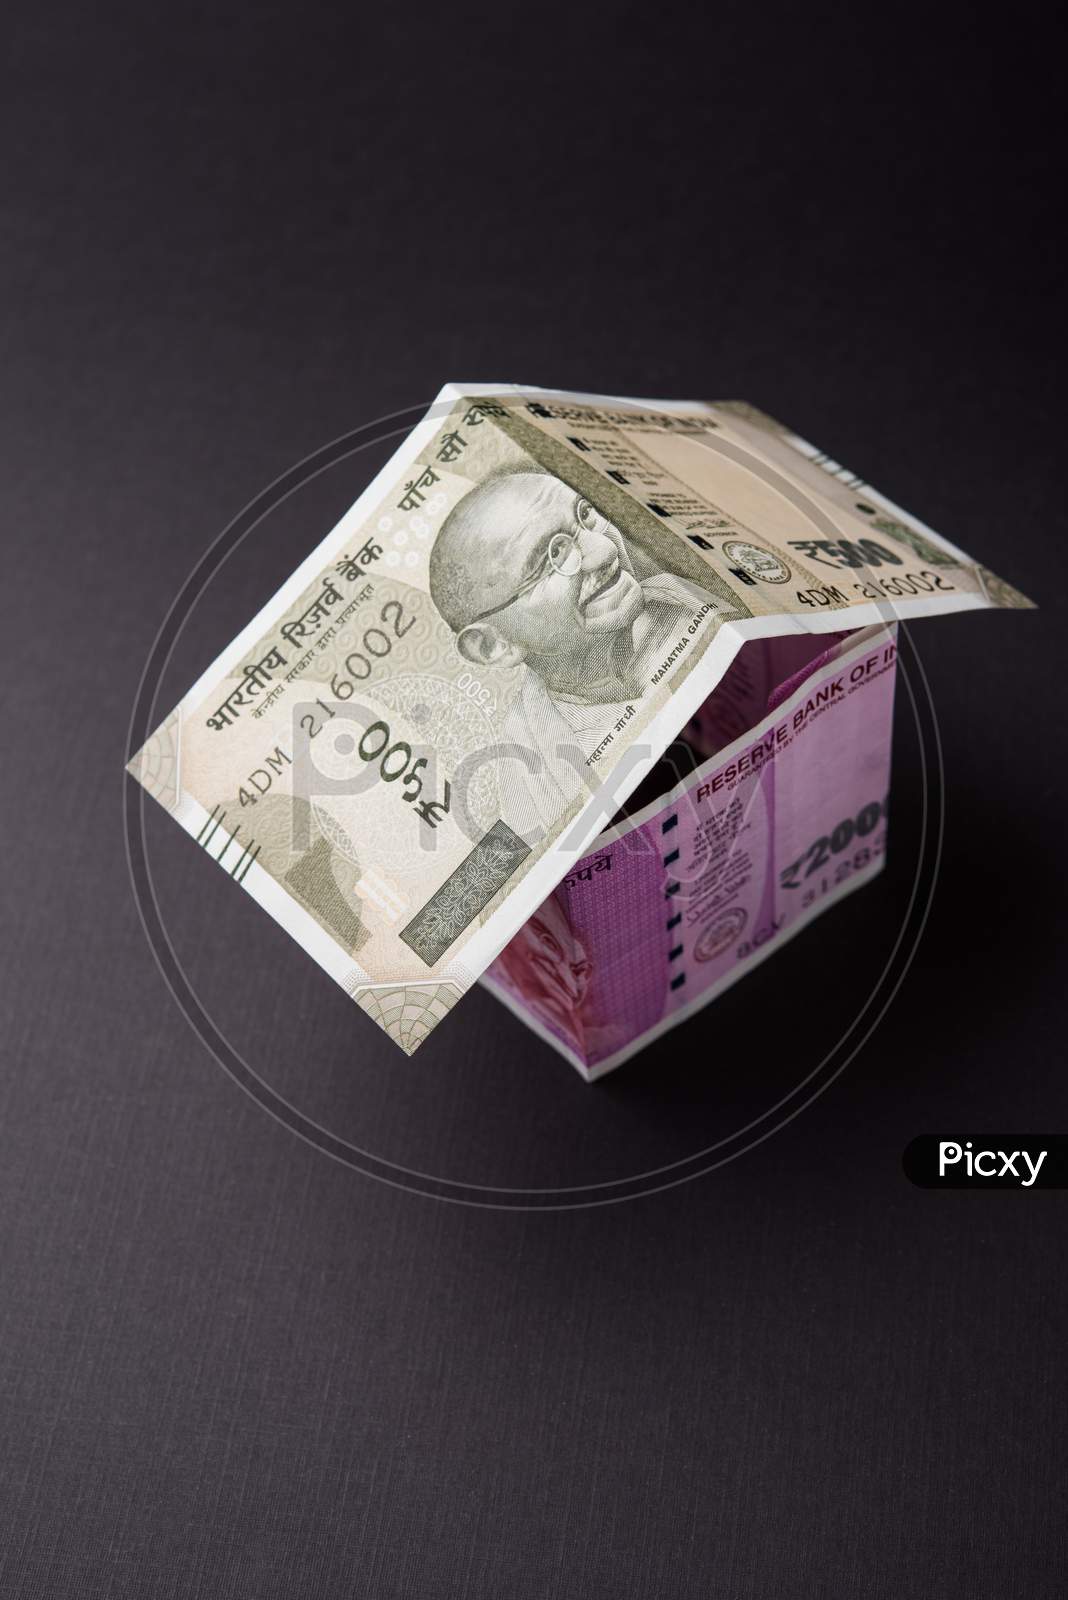 3D Model house using Indian currency